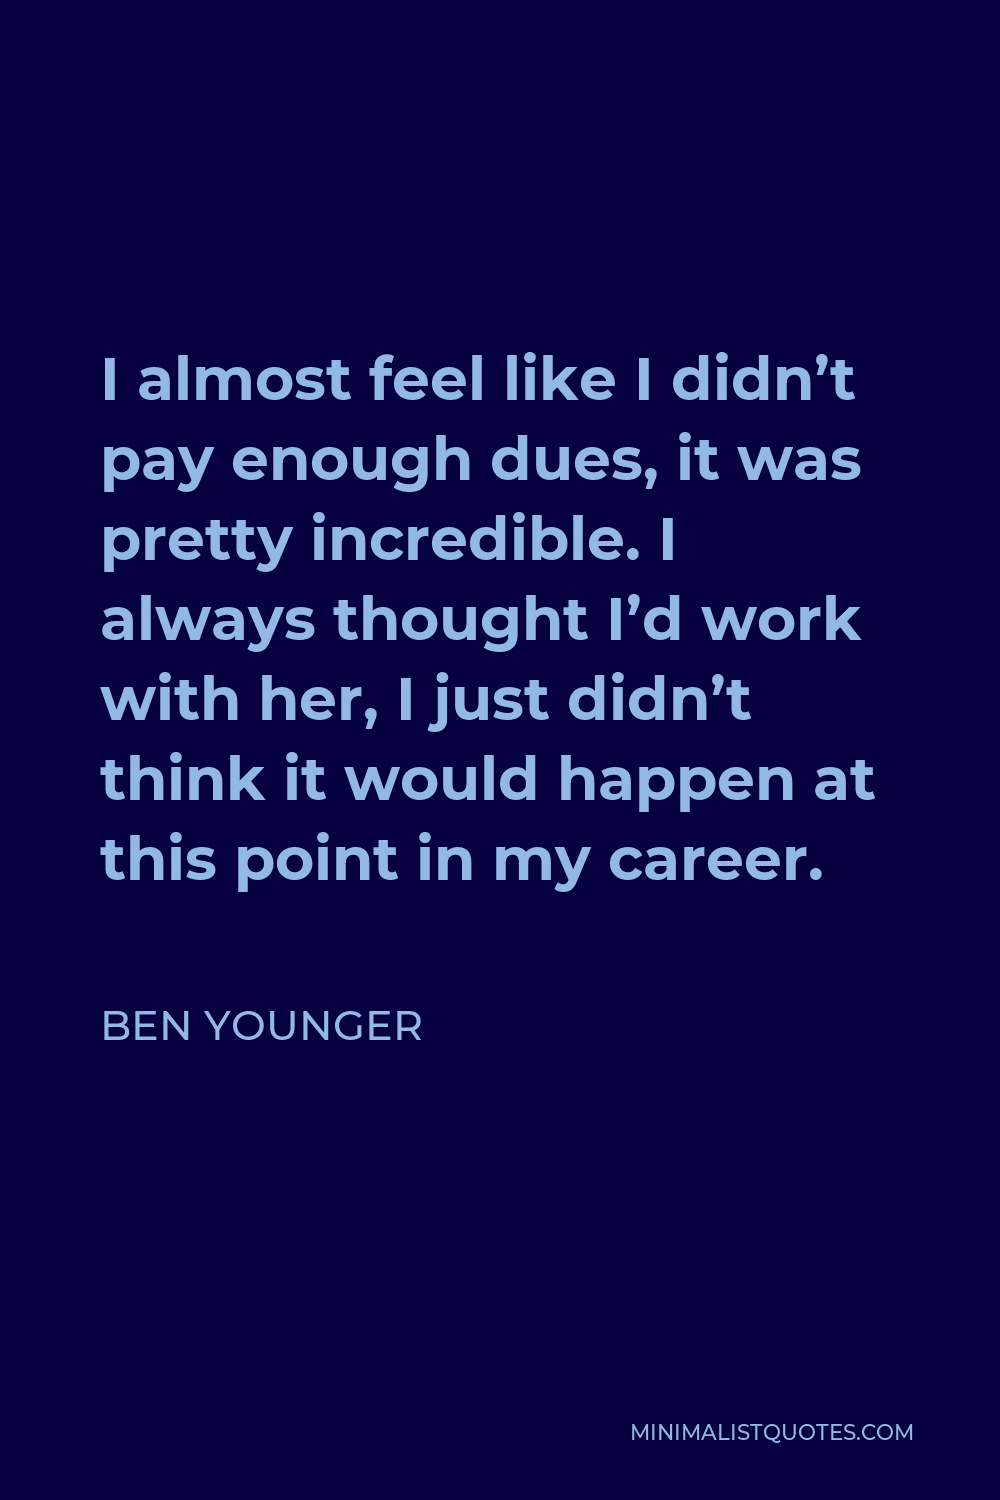 Ben Younger Quote - I almost feel like I didn’t pay enough dues, it was pretty incredible. I always thought I’d work with her, I just didn’t think it would happen at this point in my career.